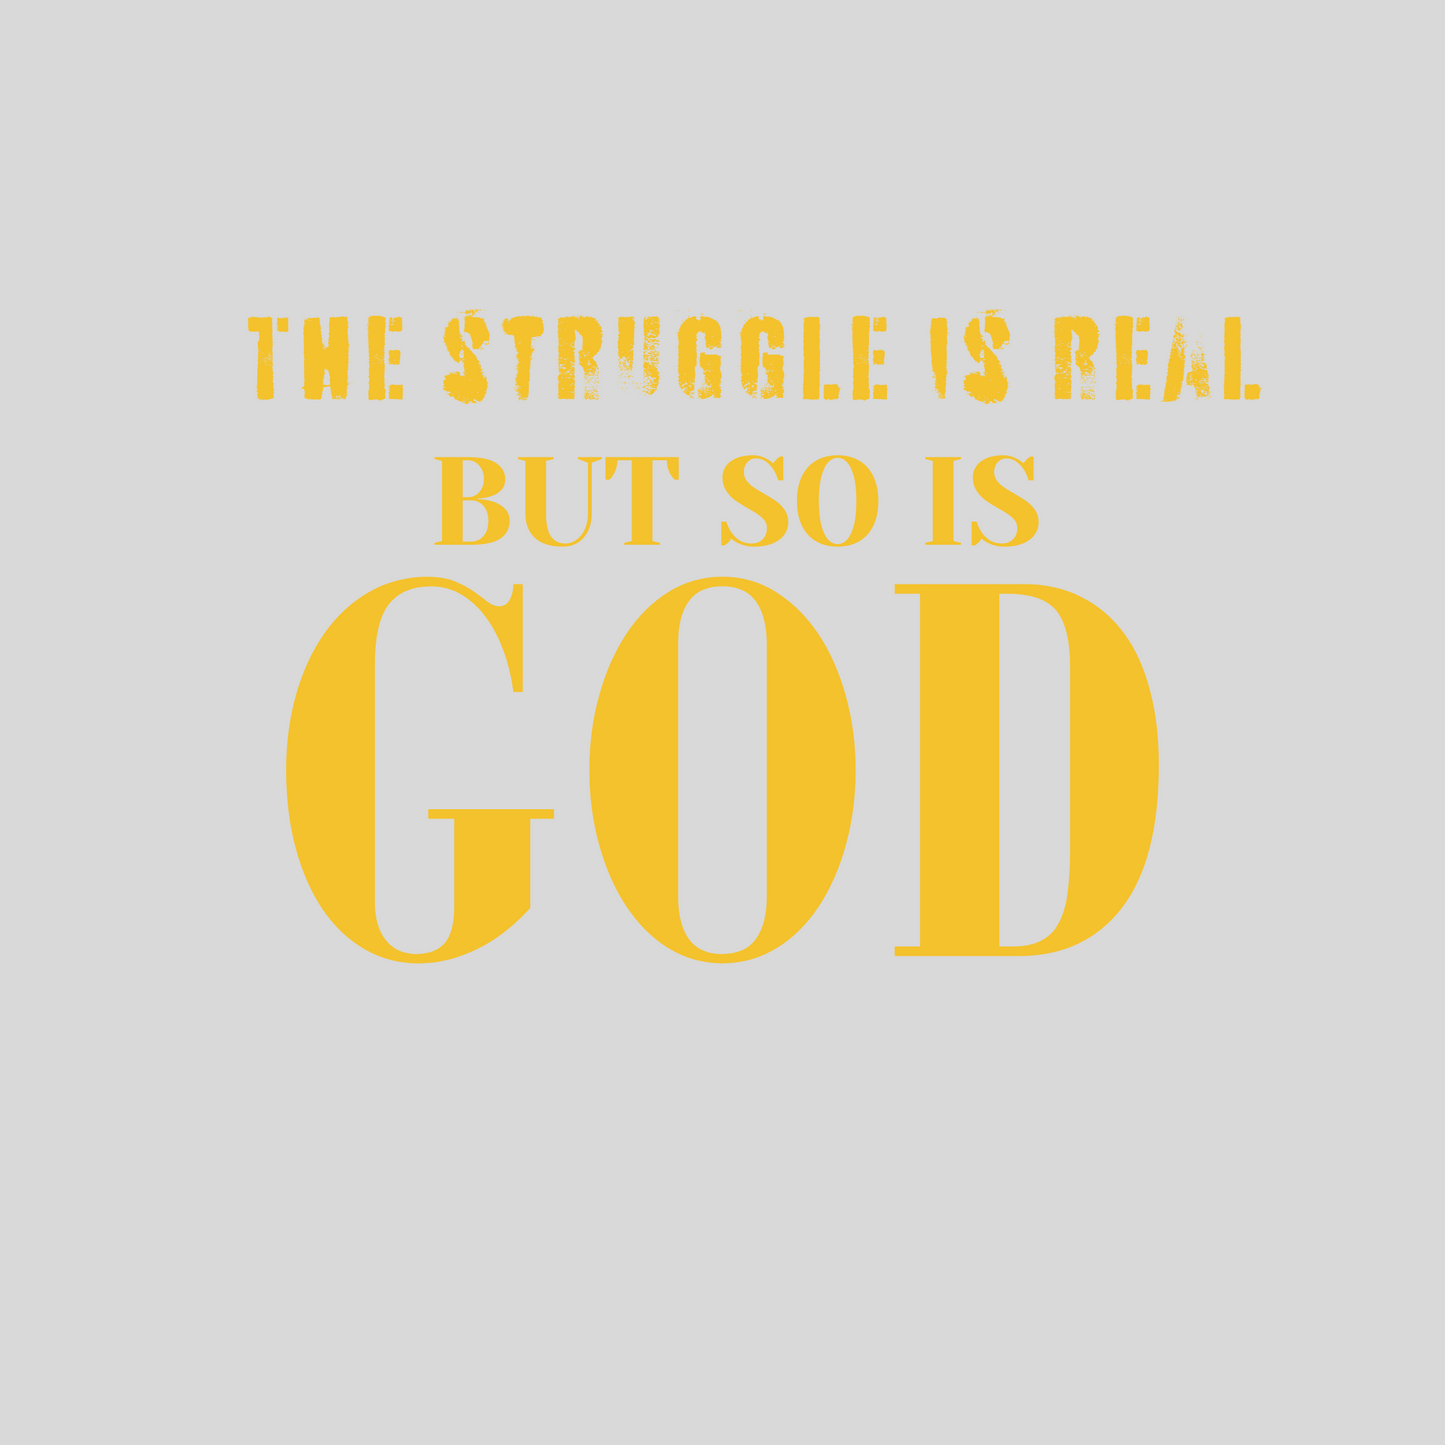 The struggle is real BUT SO IS GOD